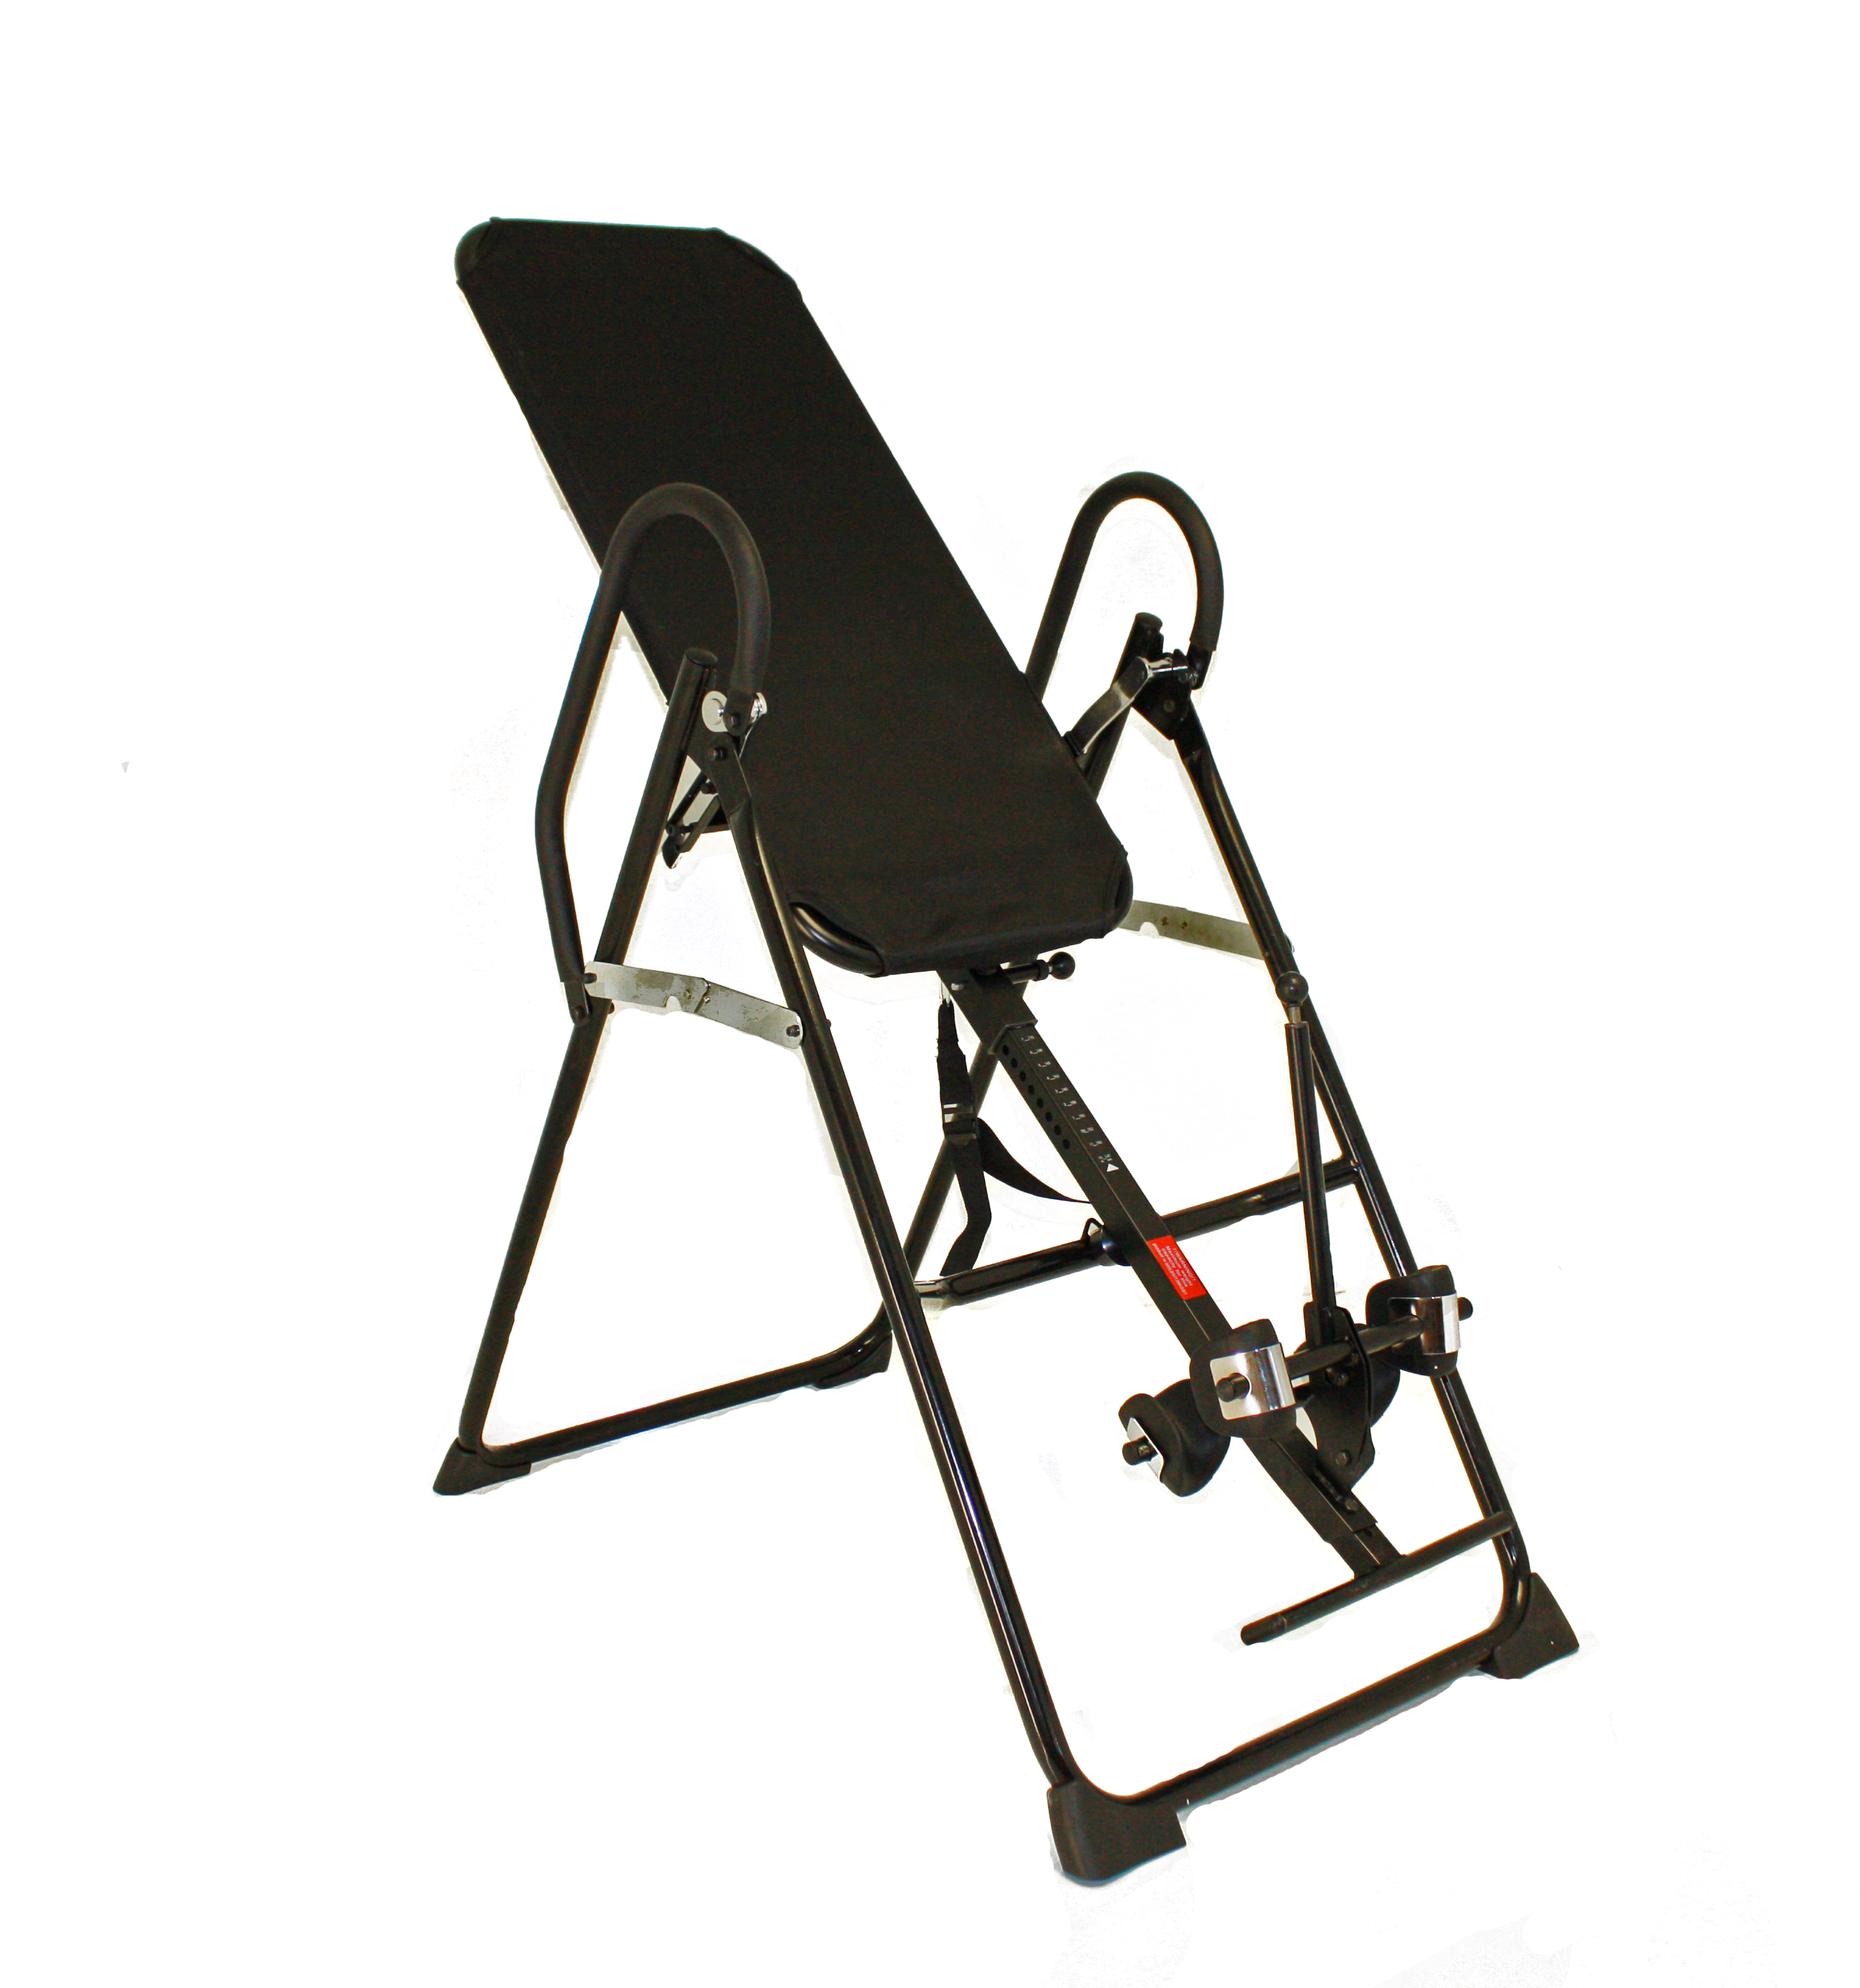 Back Swing Inversion Table